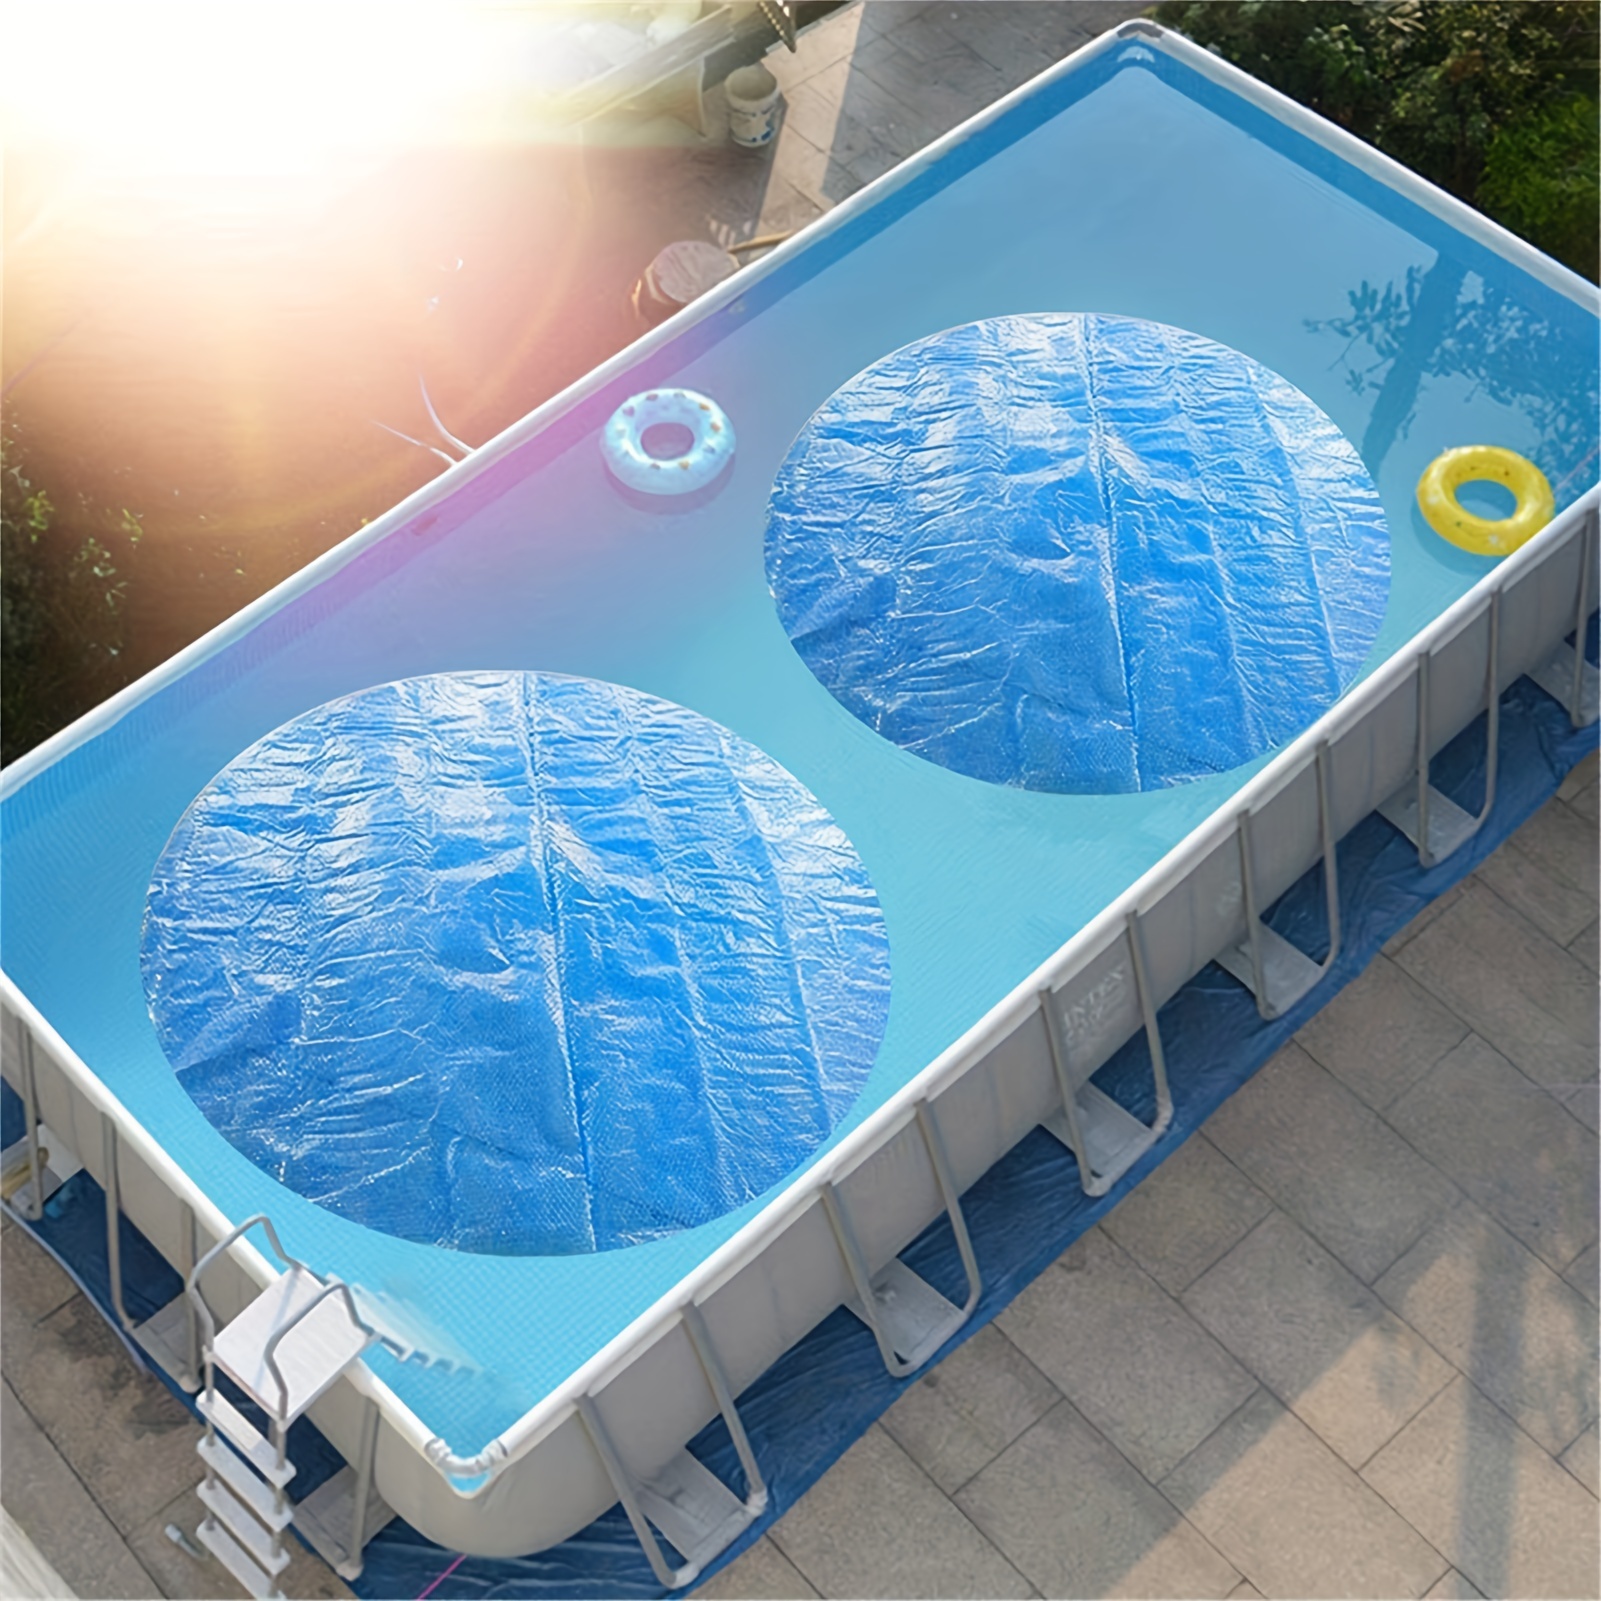 Dropship 1pc Solar Pool Covers For Heat Retaining Blanket For In-Ground And  Above-Ground Round Swimming Pools,Blue 10-Foot Round Solar Cover Waterproof  Dustproof Pool Cover For Inflatable Swimming Pool Hot Tub to Sell